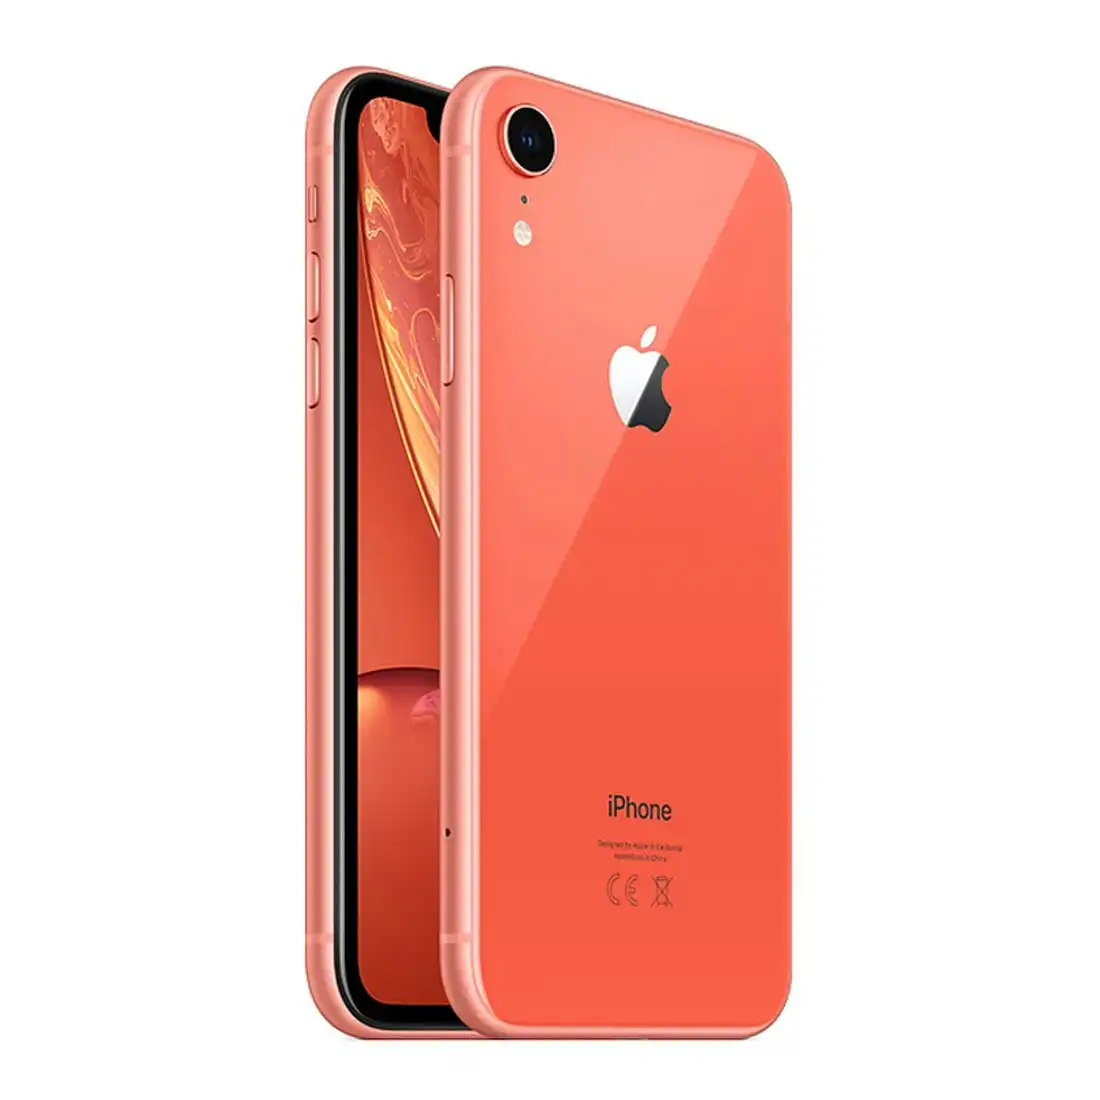 Apple iPhone XR 128GB - Coral [Refurbished] - Excellent